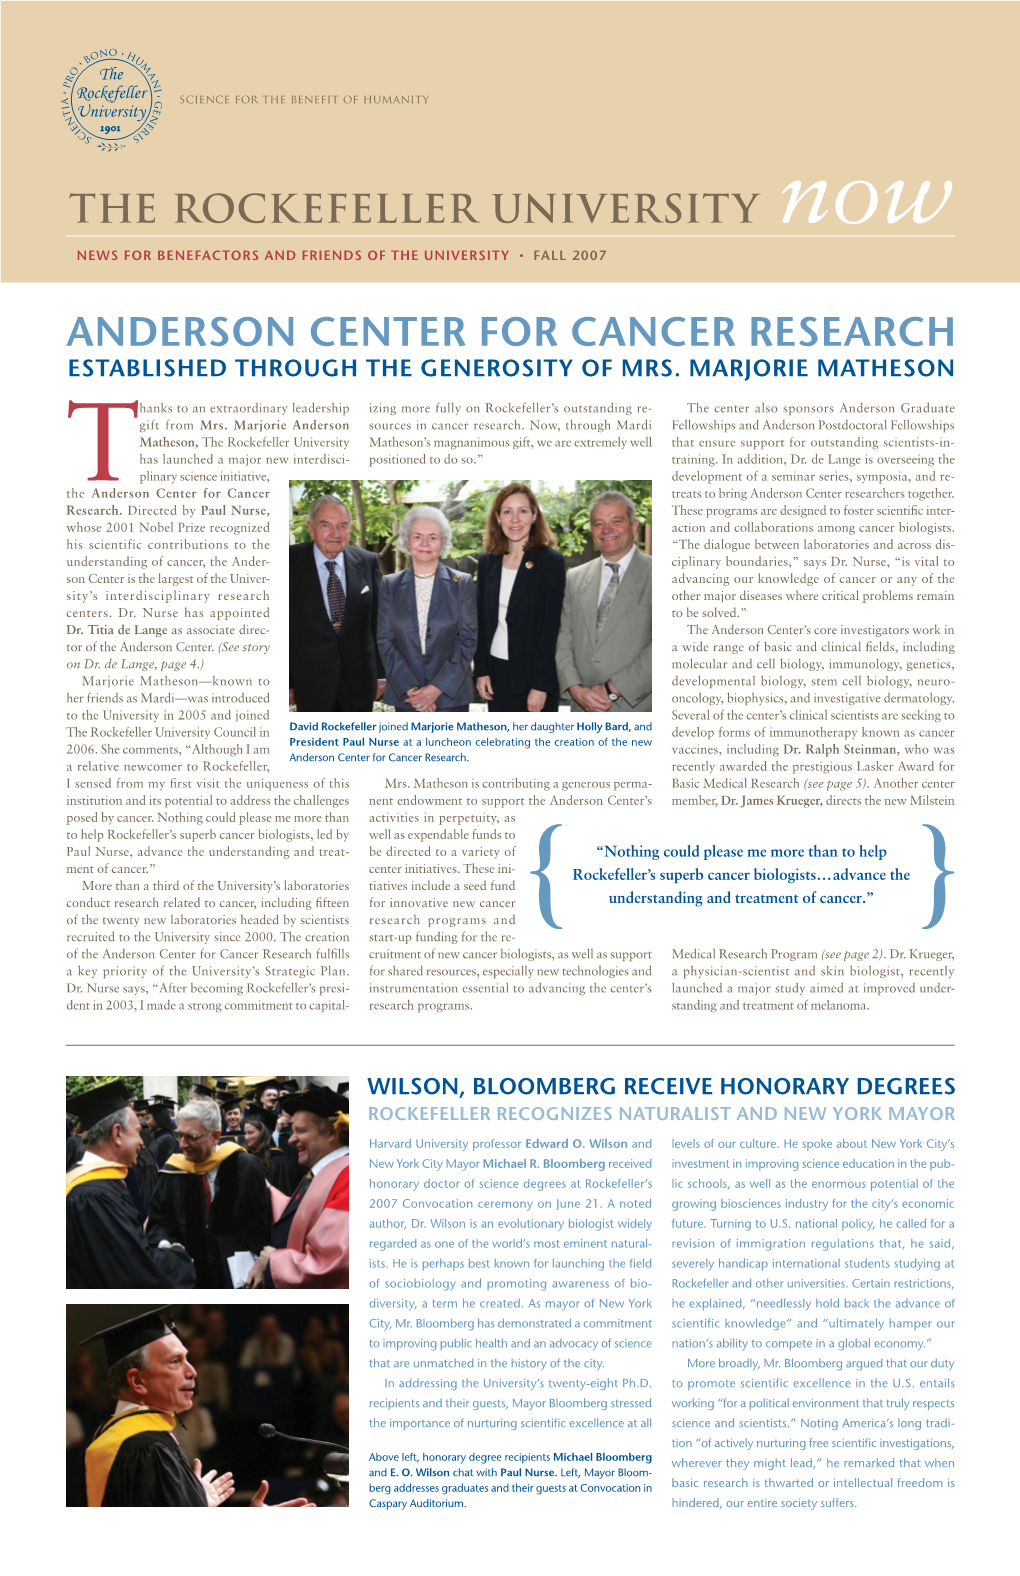 Anderson Center for Cancer Research Established Through the Generosity of Mrs